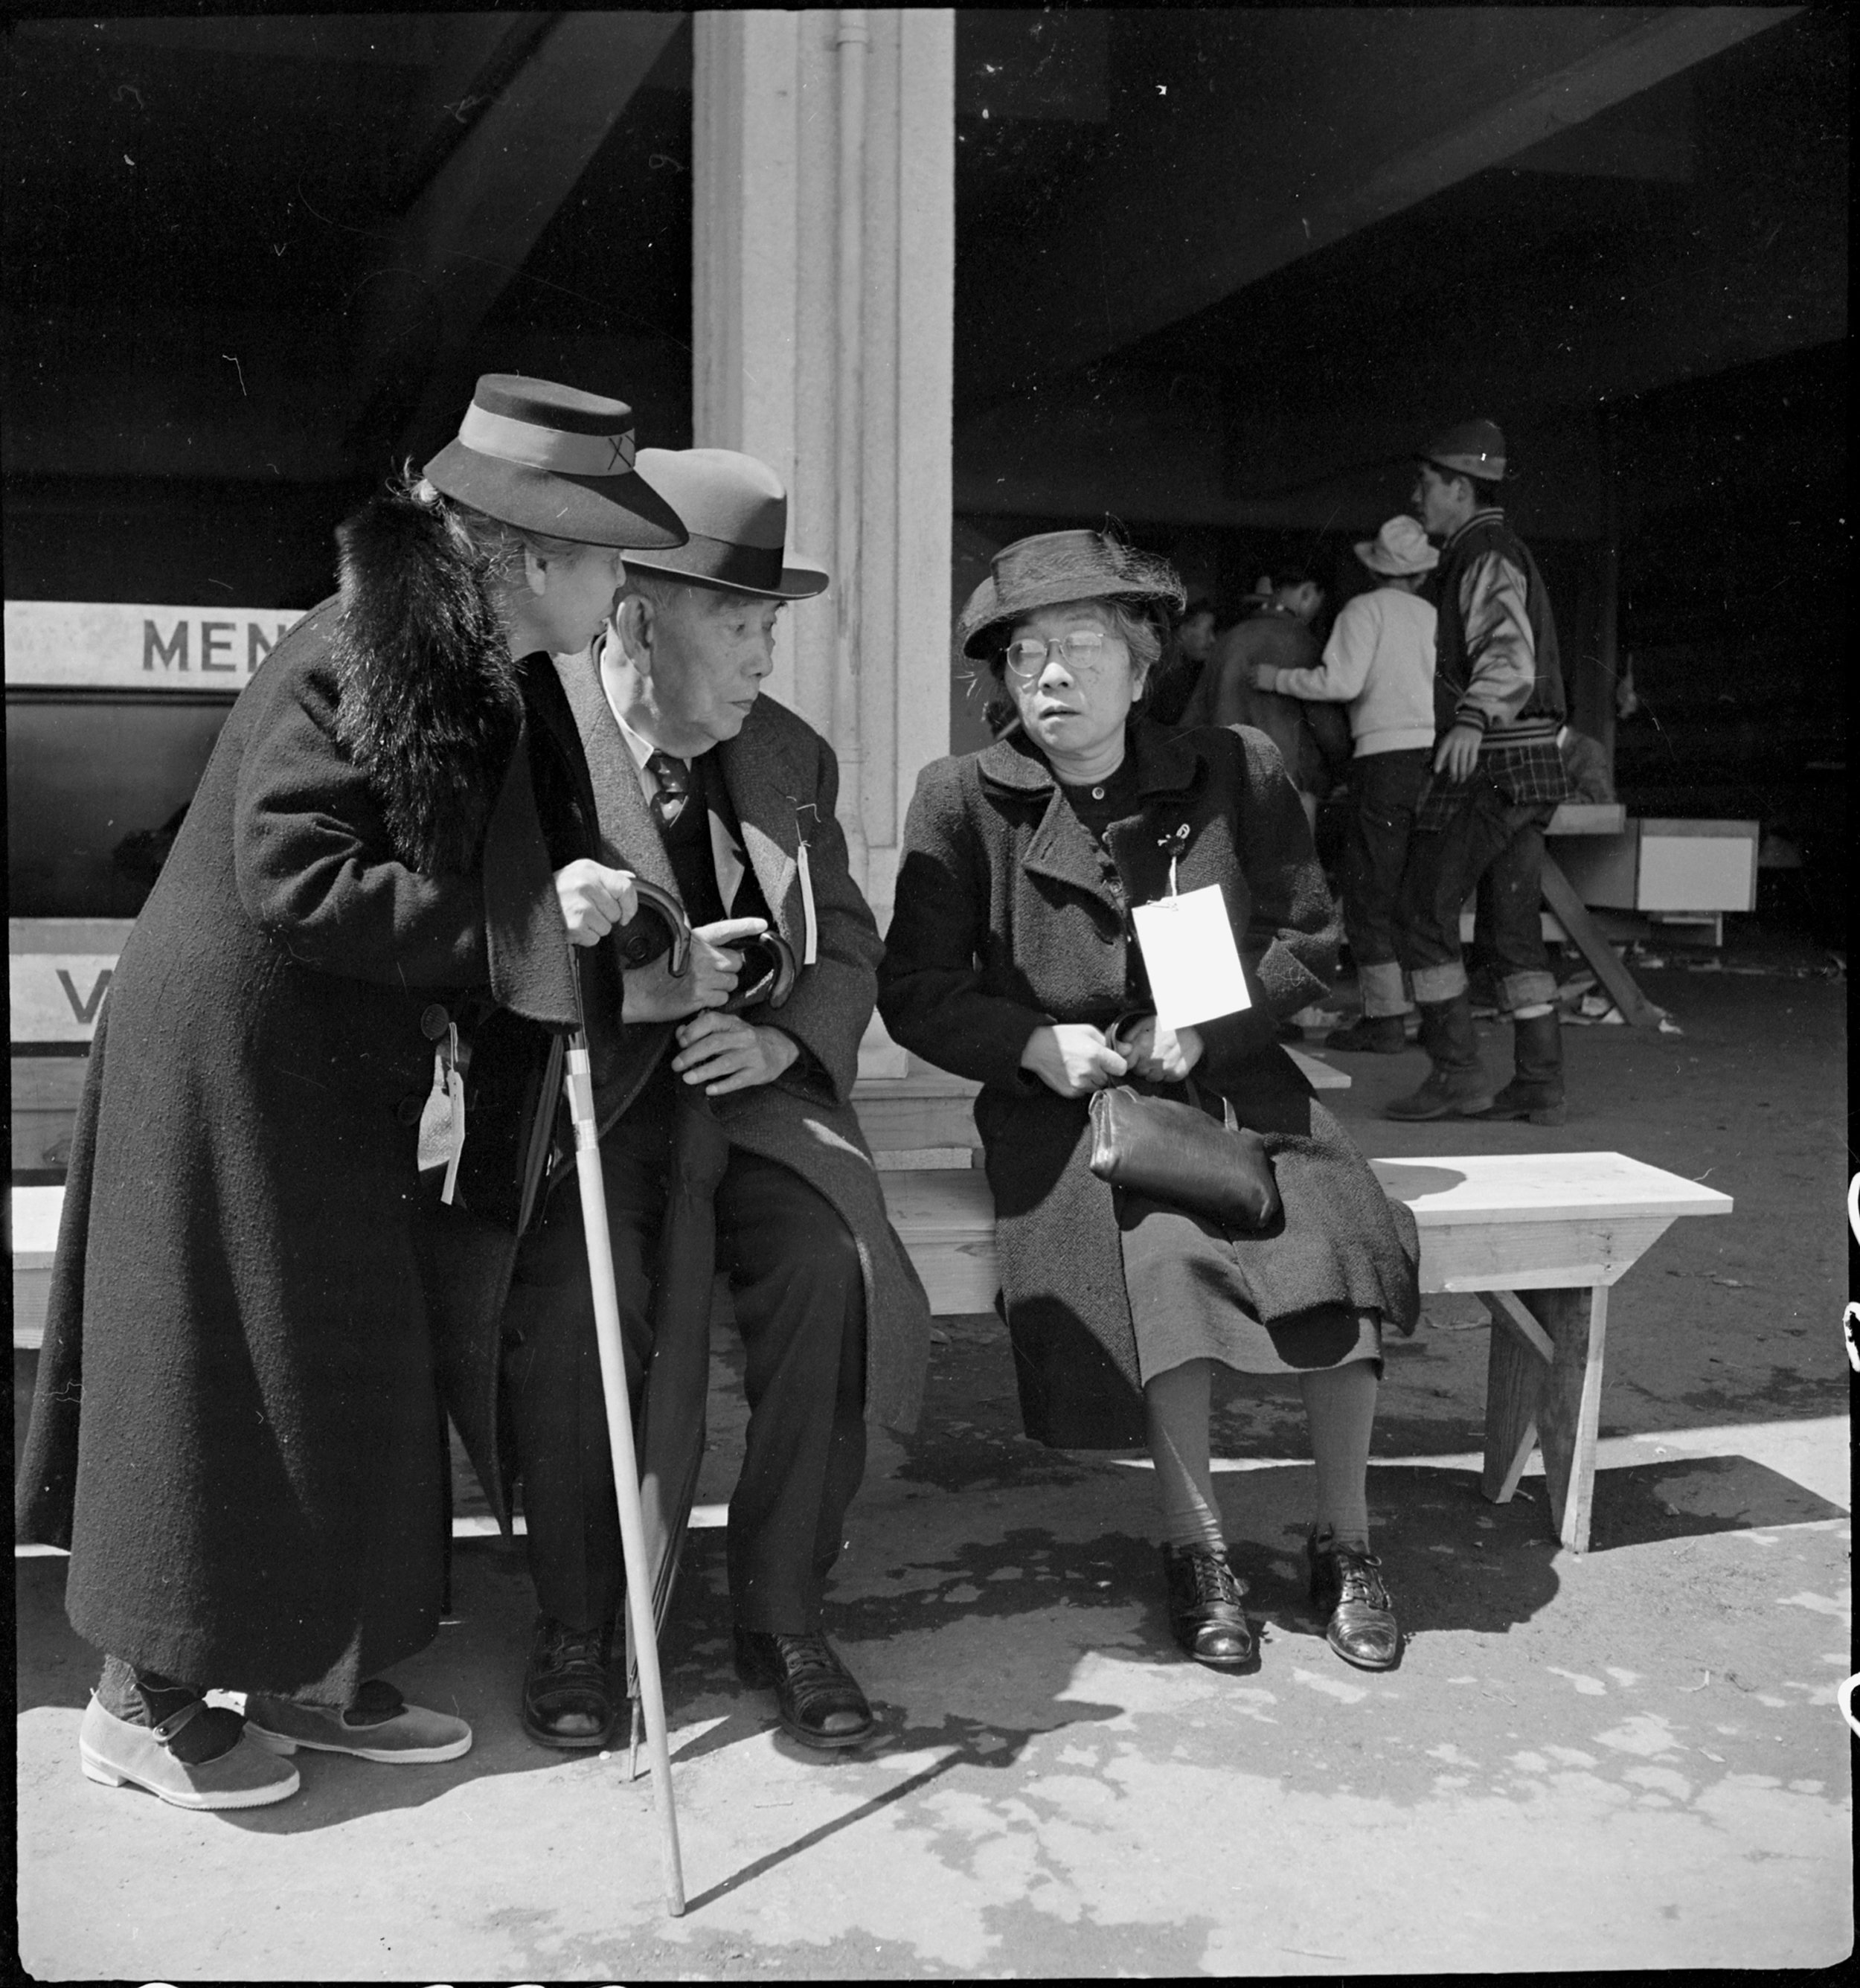  San Bruno, Caliofnira. These older evacuees of Japanese ancestry have just been registered and are resting before being assigned to their living quarters in the barracks. The large tag worn by the woman on the right indicates special consideration f